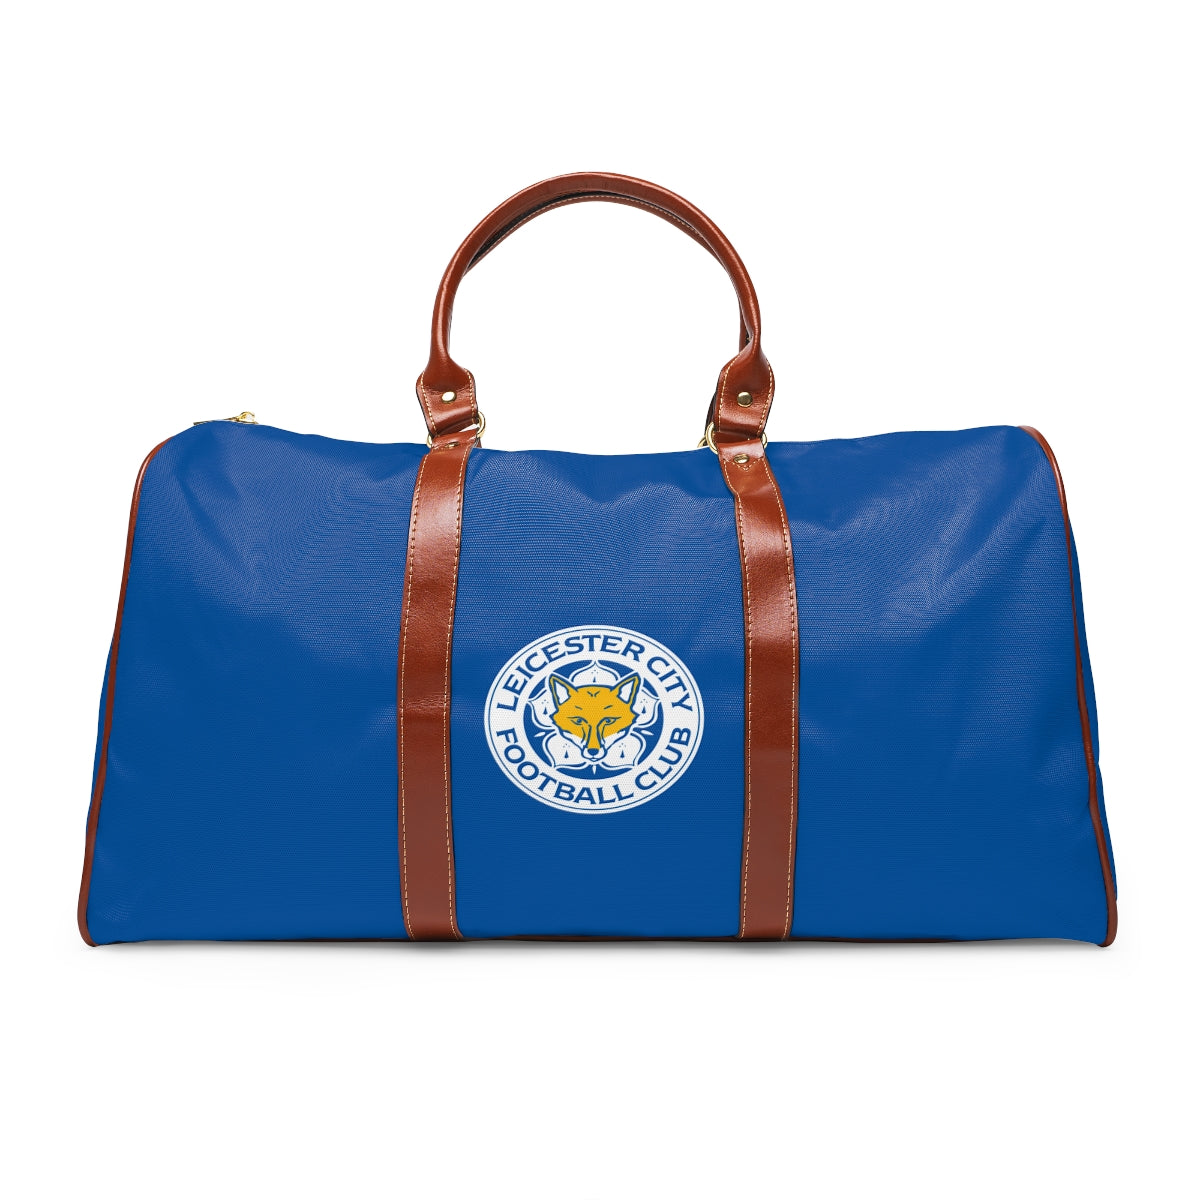 Leicester City Waterproof Travel Bag